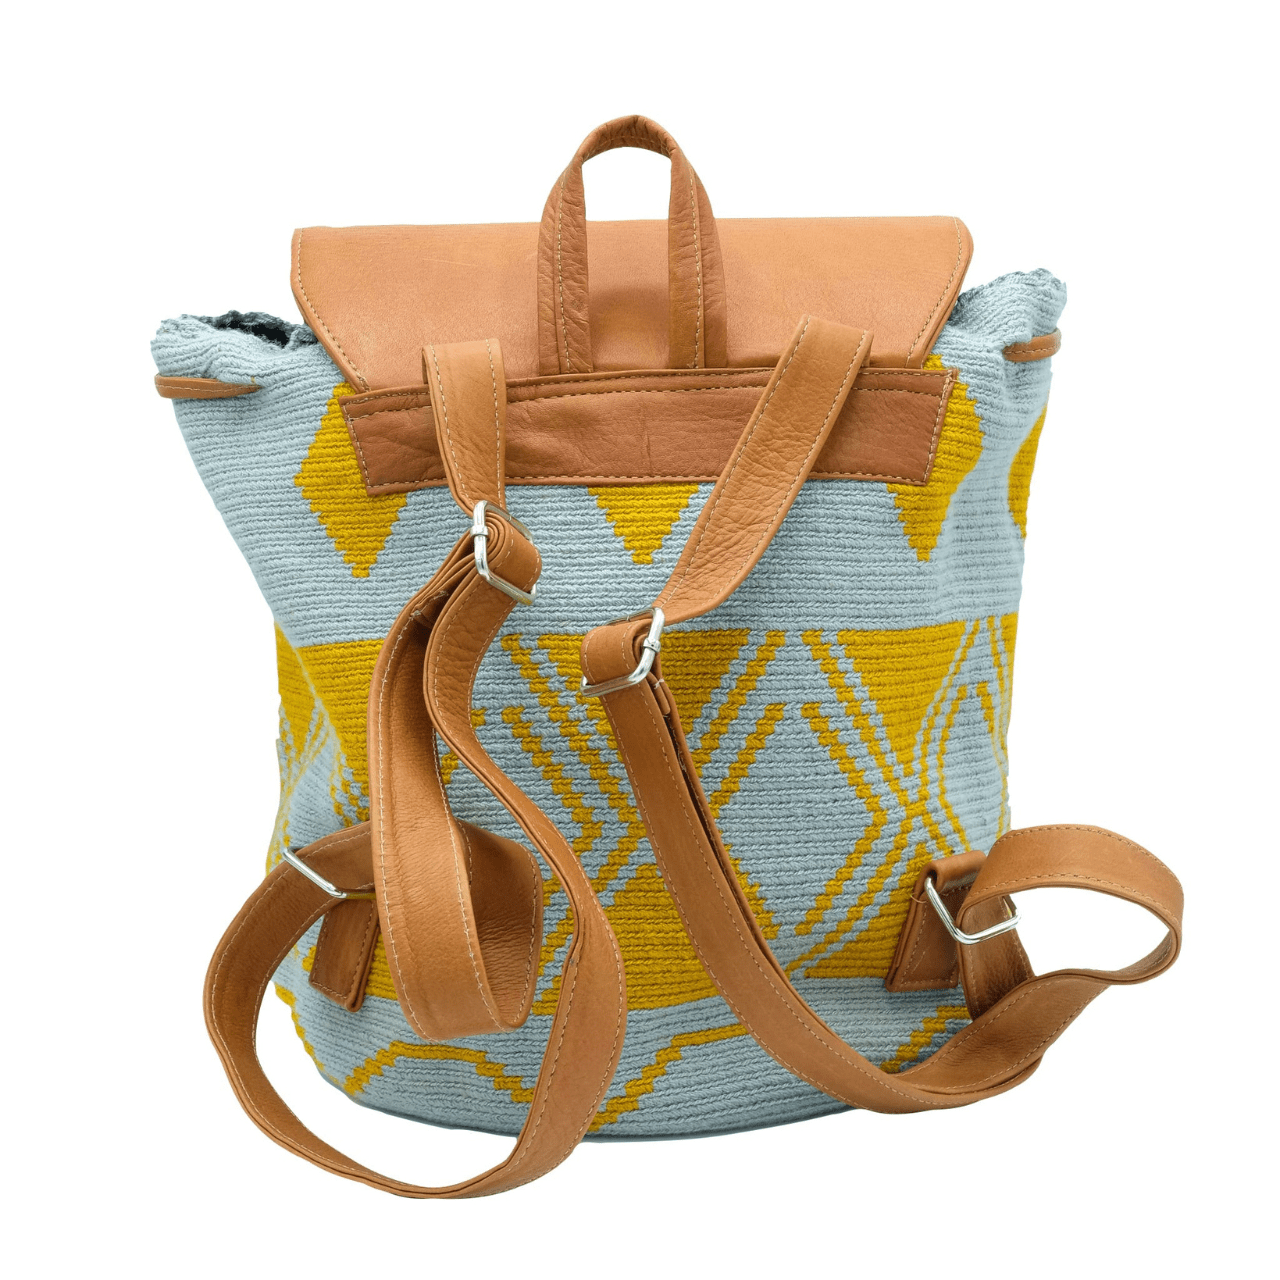 Taganga leather backpack featuring a stunning Wayuu pattern in a captivating blend of blue-gray and ochre colors. The design is accentuated with natural genuine leather, creating a beautiful contrast. This versatile bag is perfect for day outings or short trips, offering a lightweight and comfortable carrying experience.